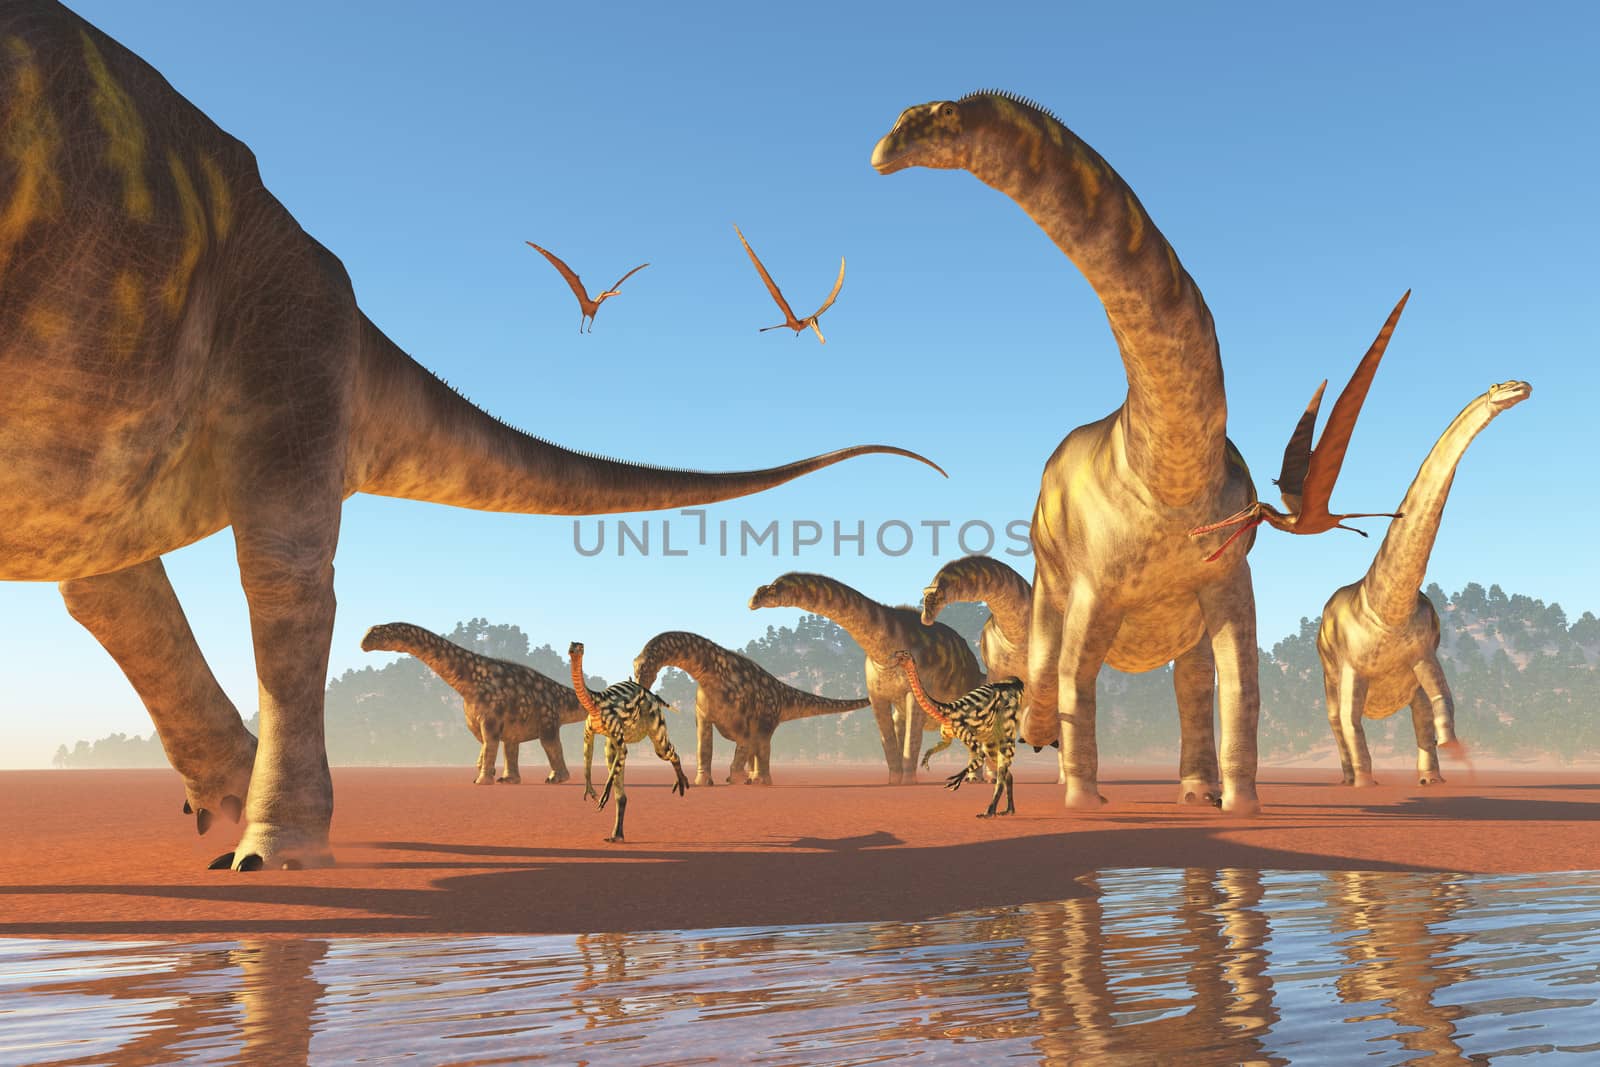 Two Deinocherius move along with a herd of Agentinosaurus dinosaurs eating any insects and small animals that are stirred up.